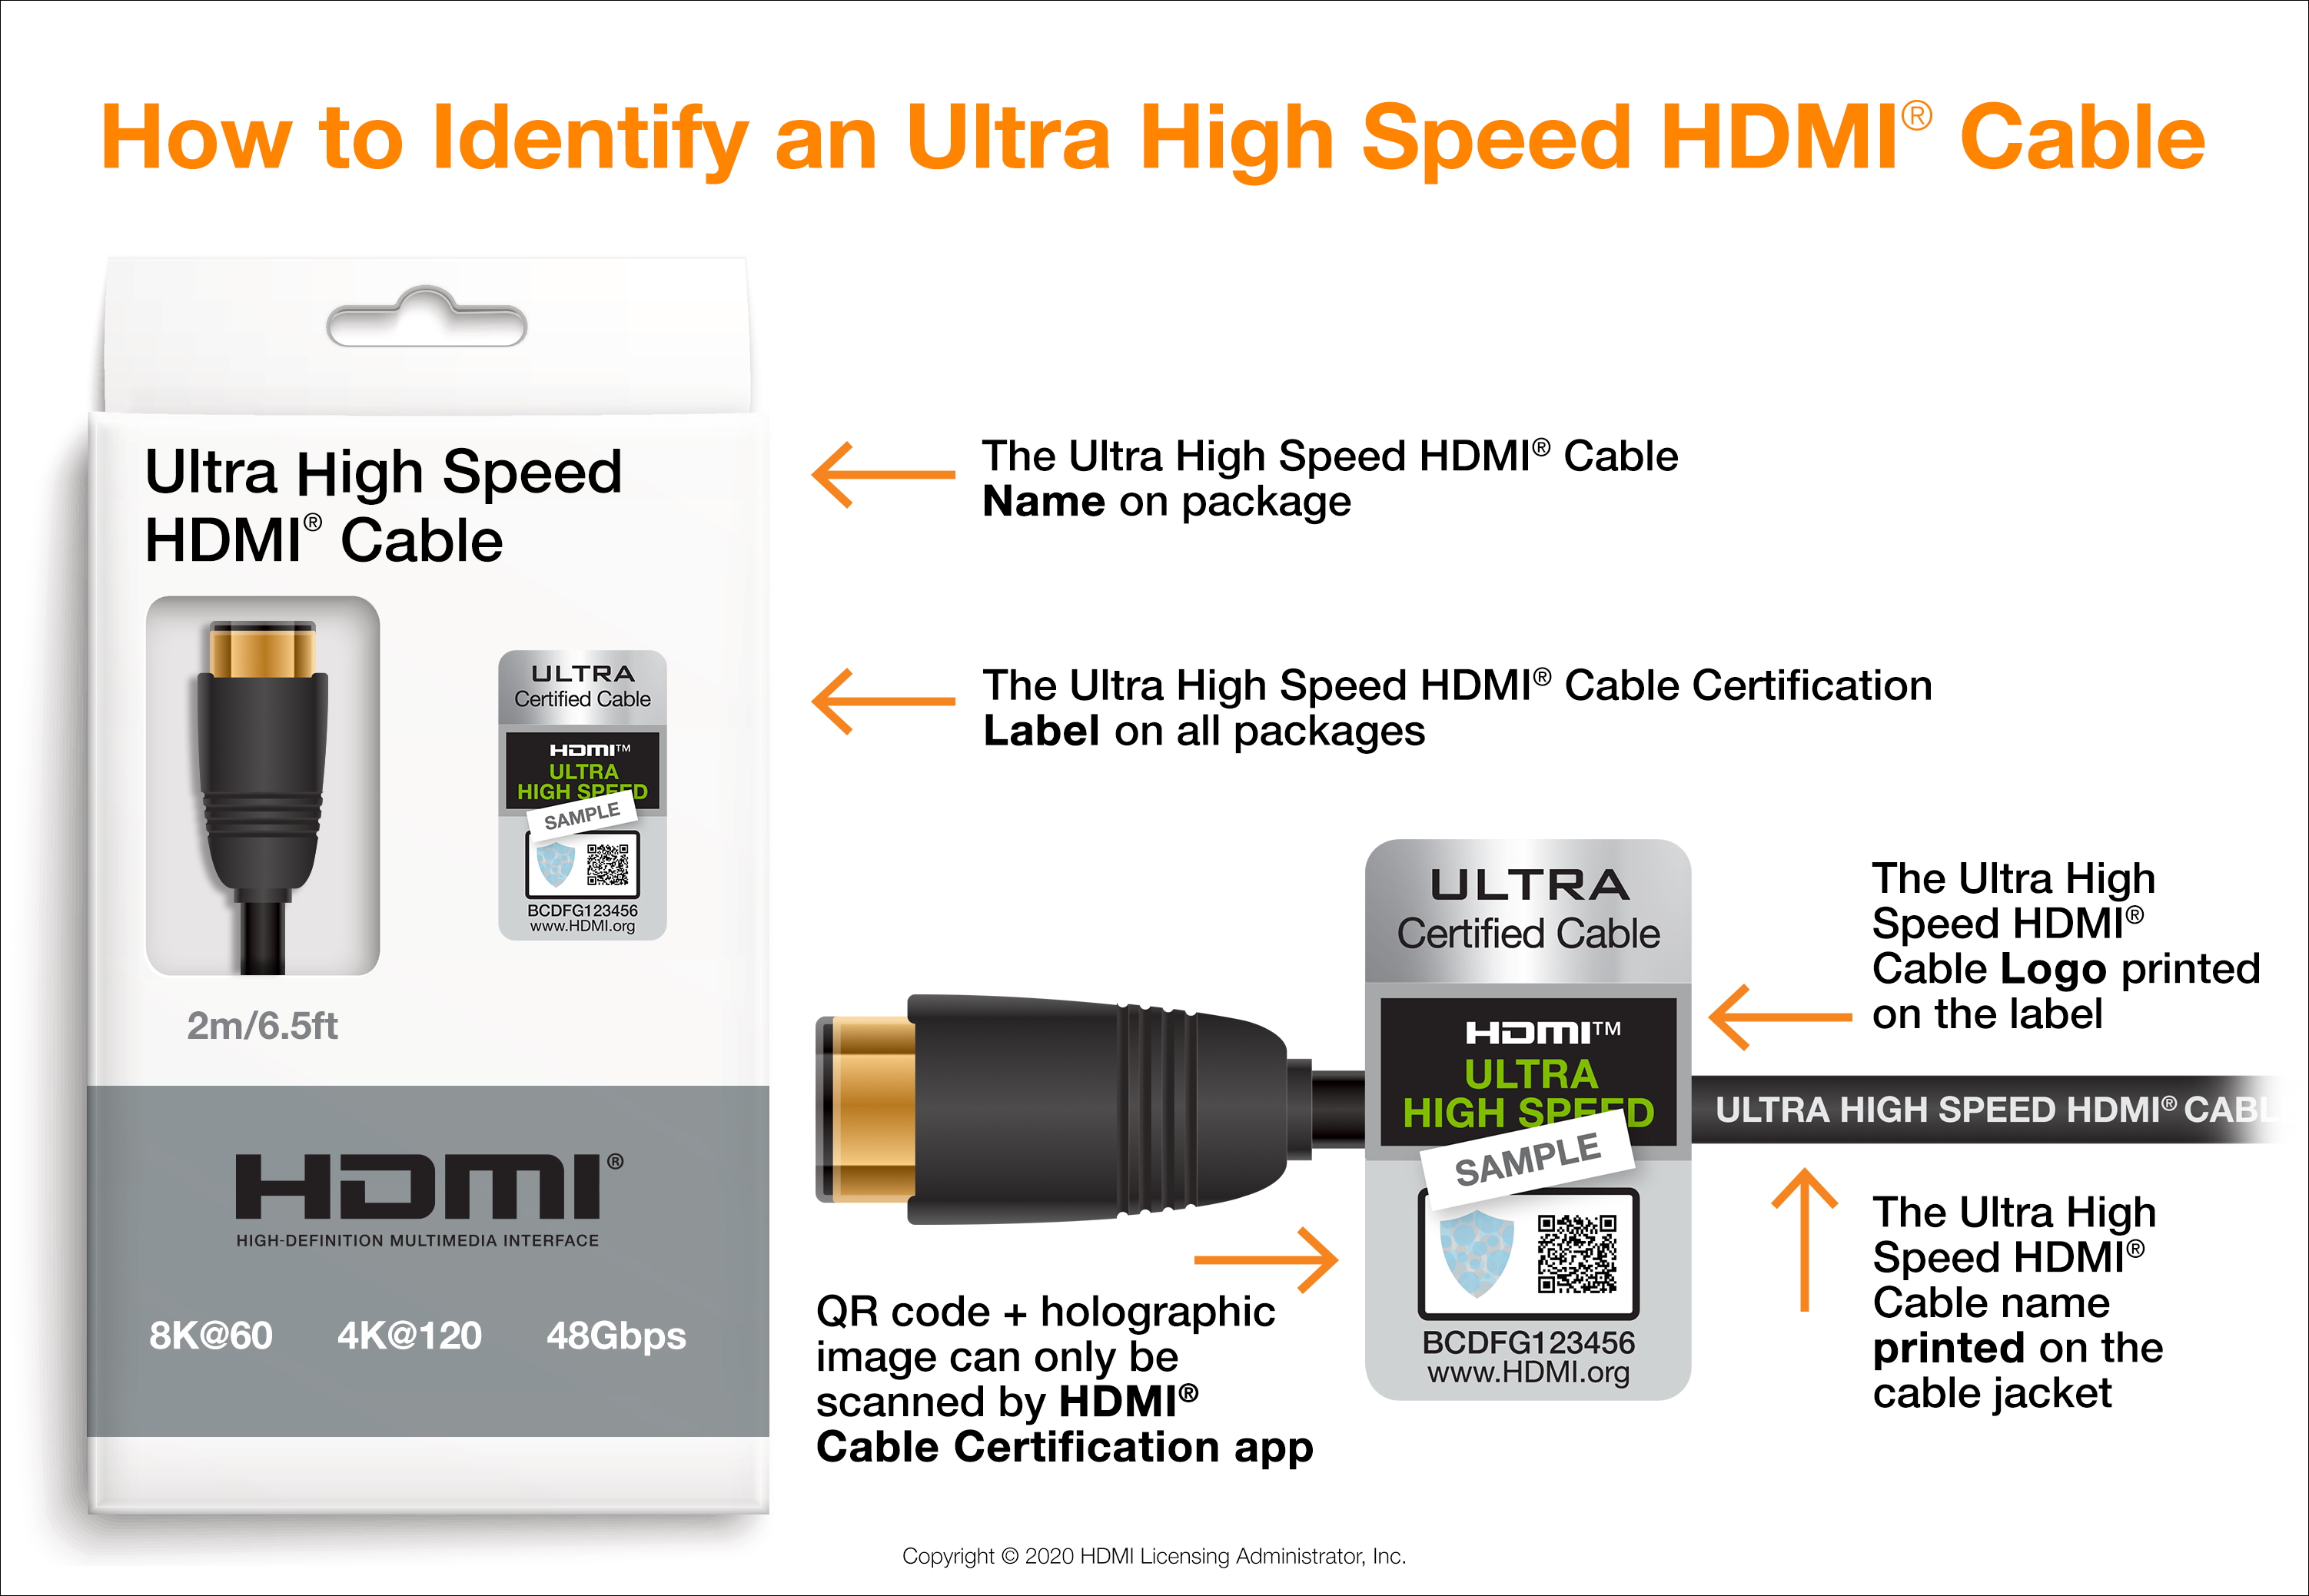 High Speed HDMI - Bandwidth Up To 48Gbps